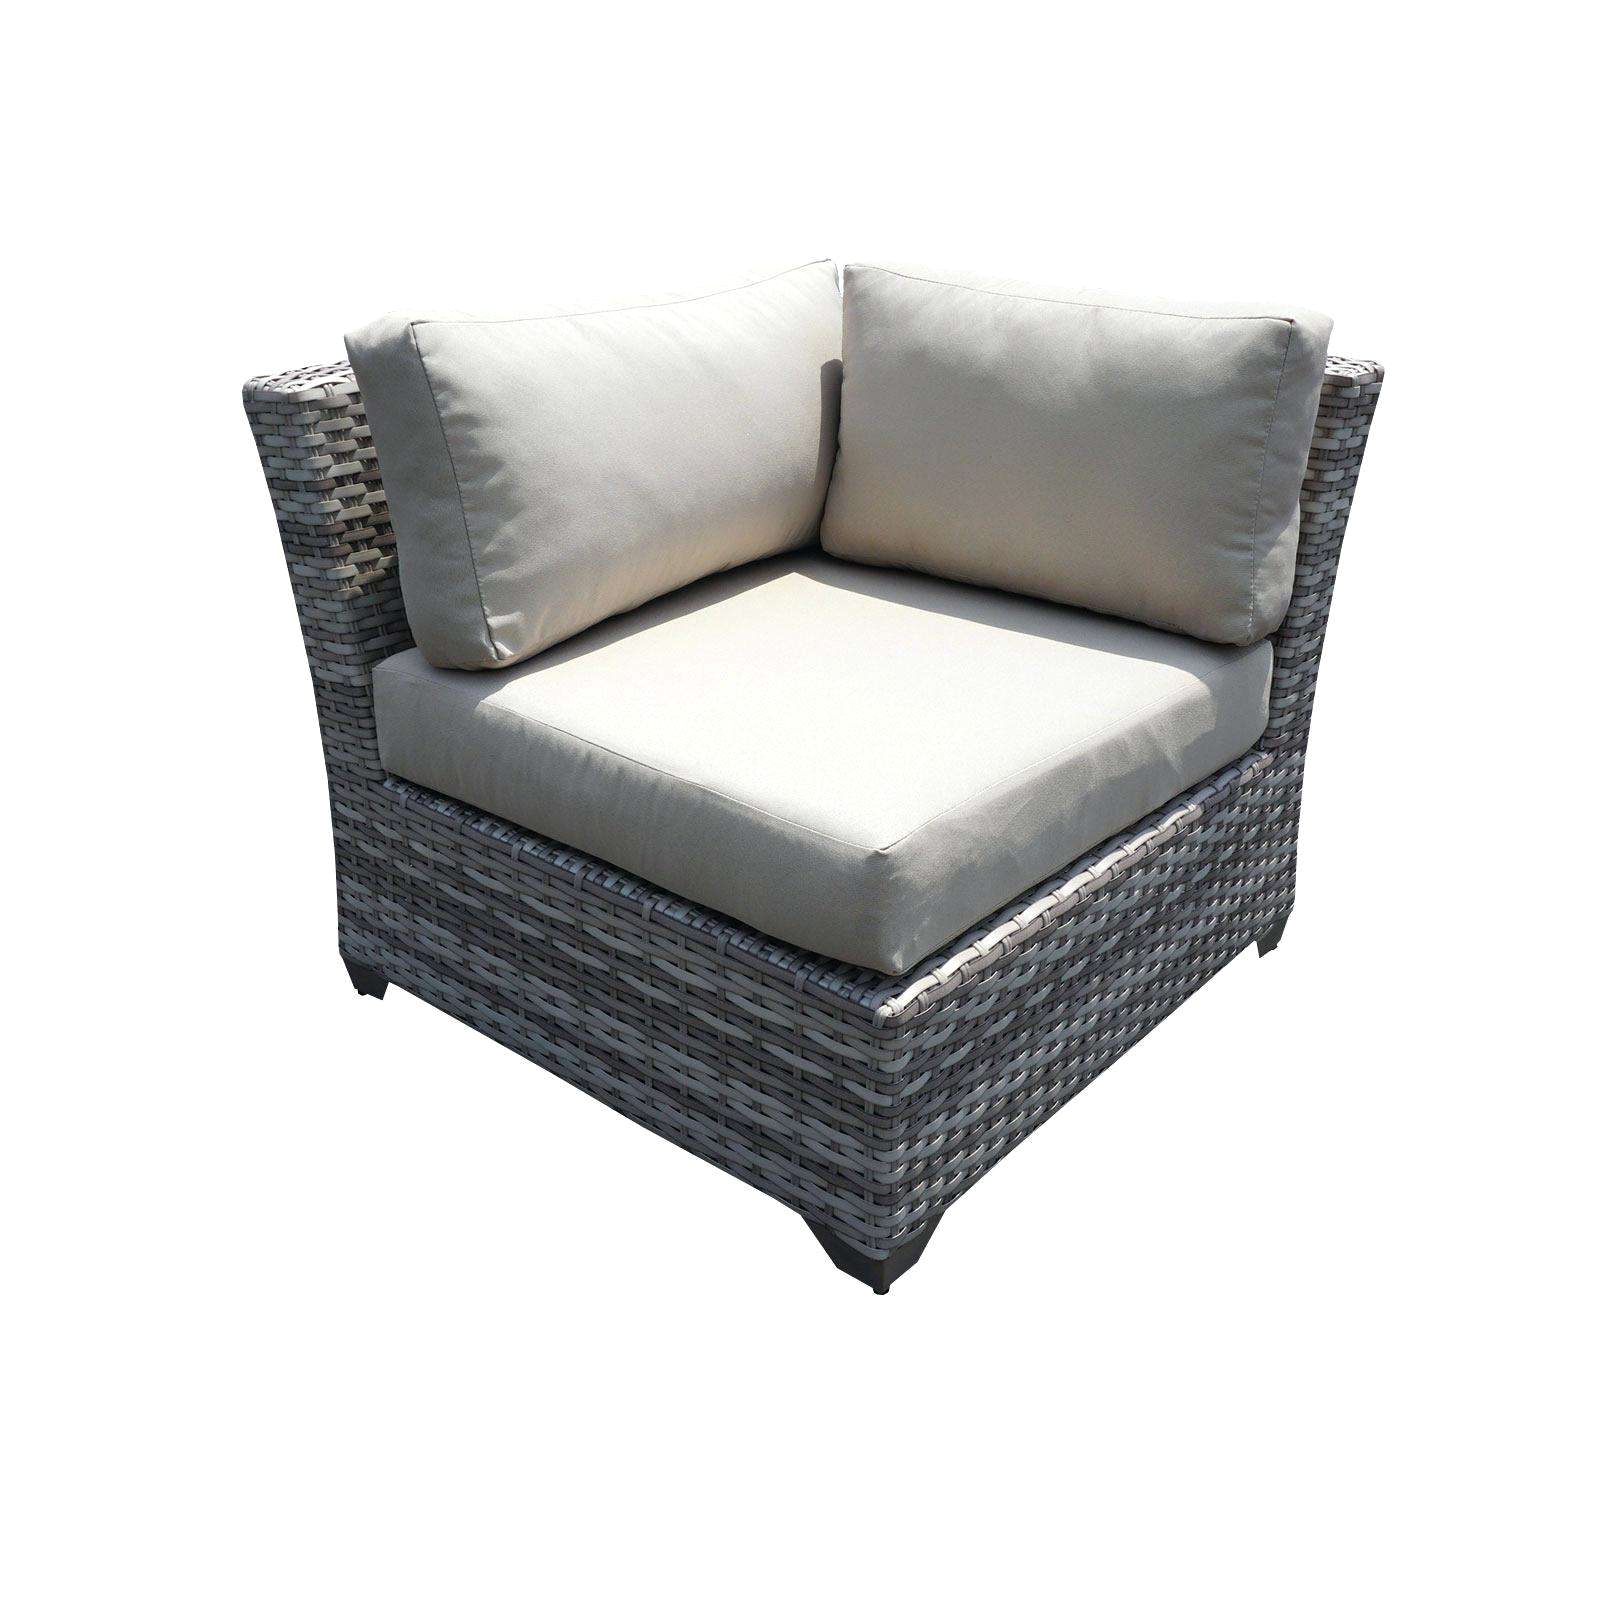 Outdoor Papasan Chair Chair Wicker Outdoor sofa 0d Patio Chairs Sale Replacement